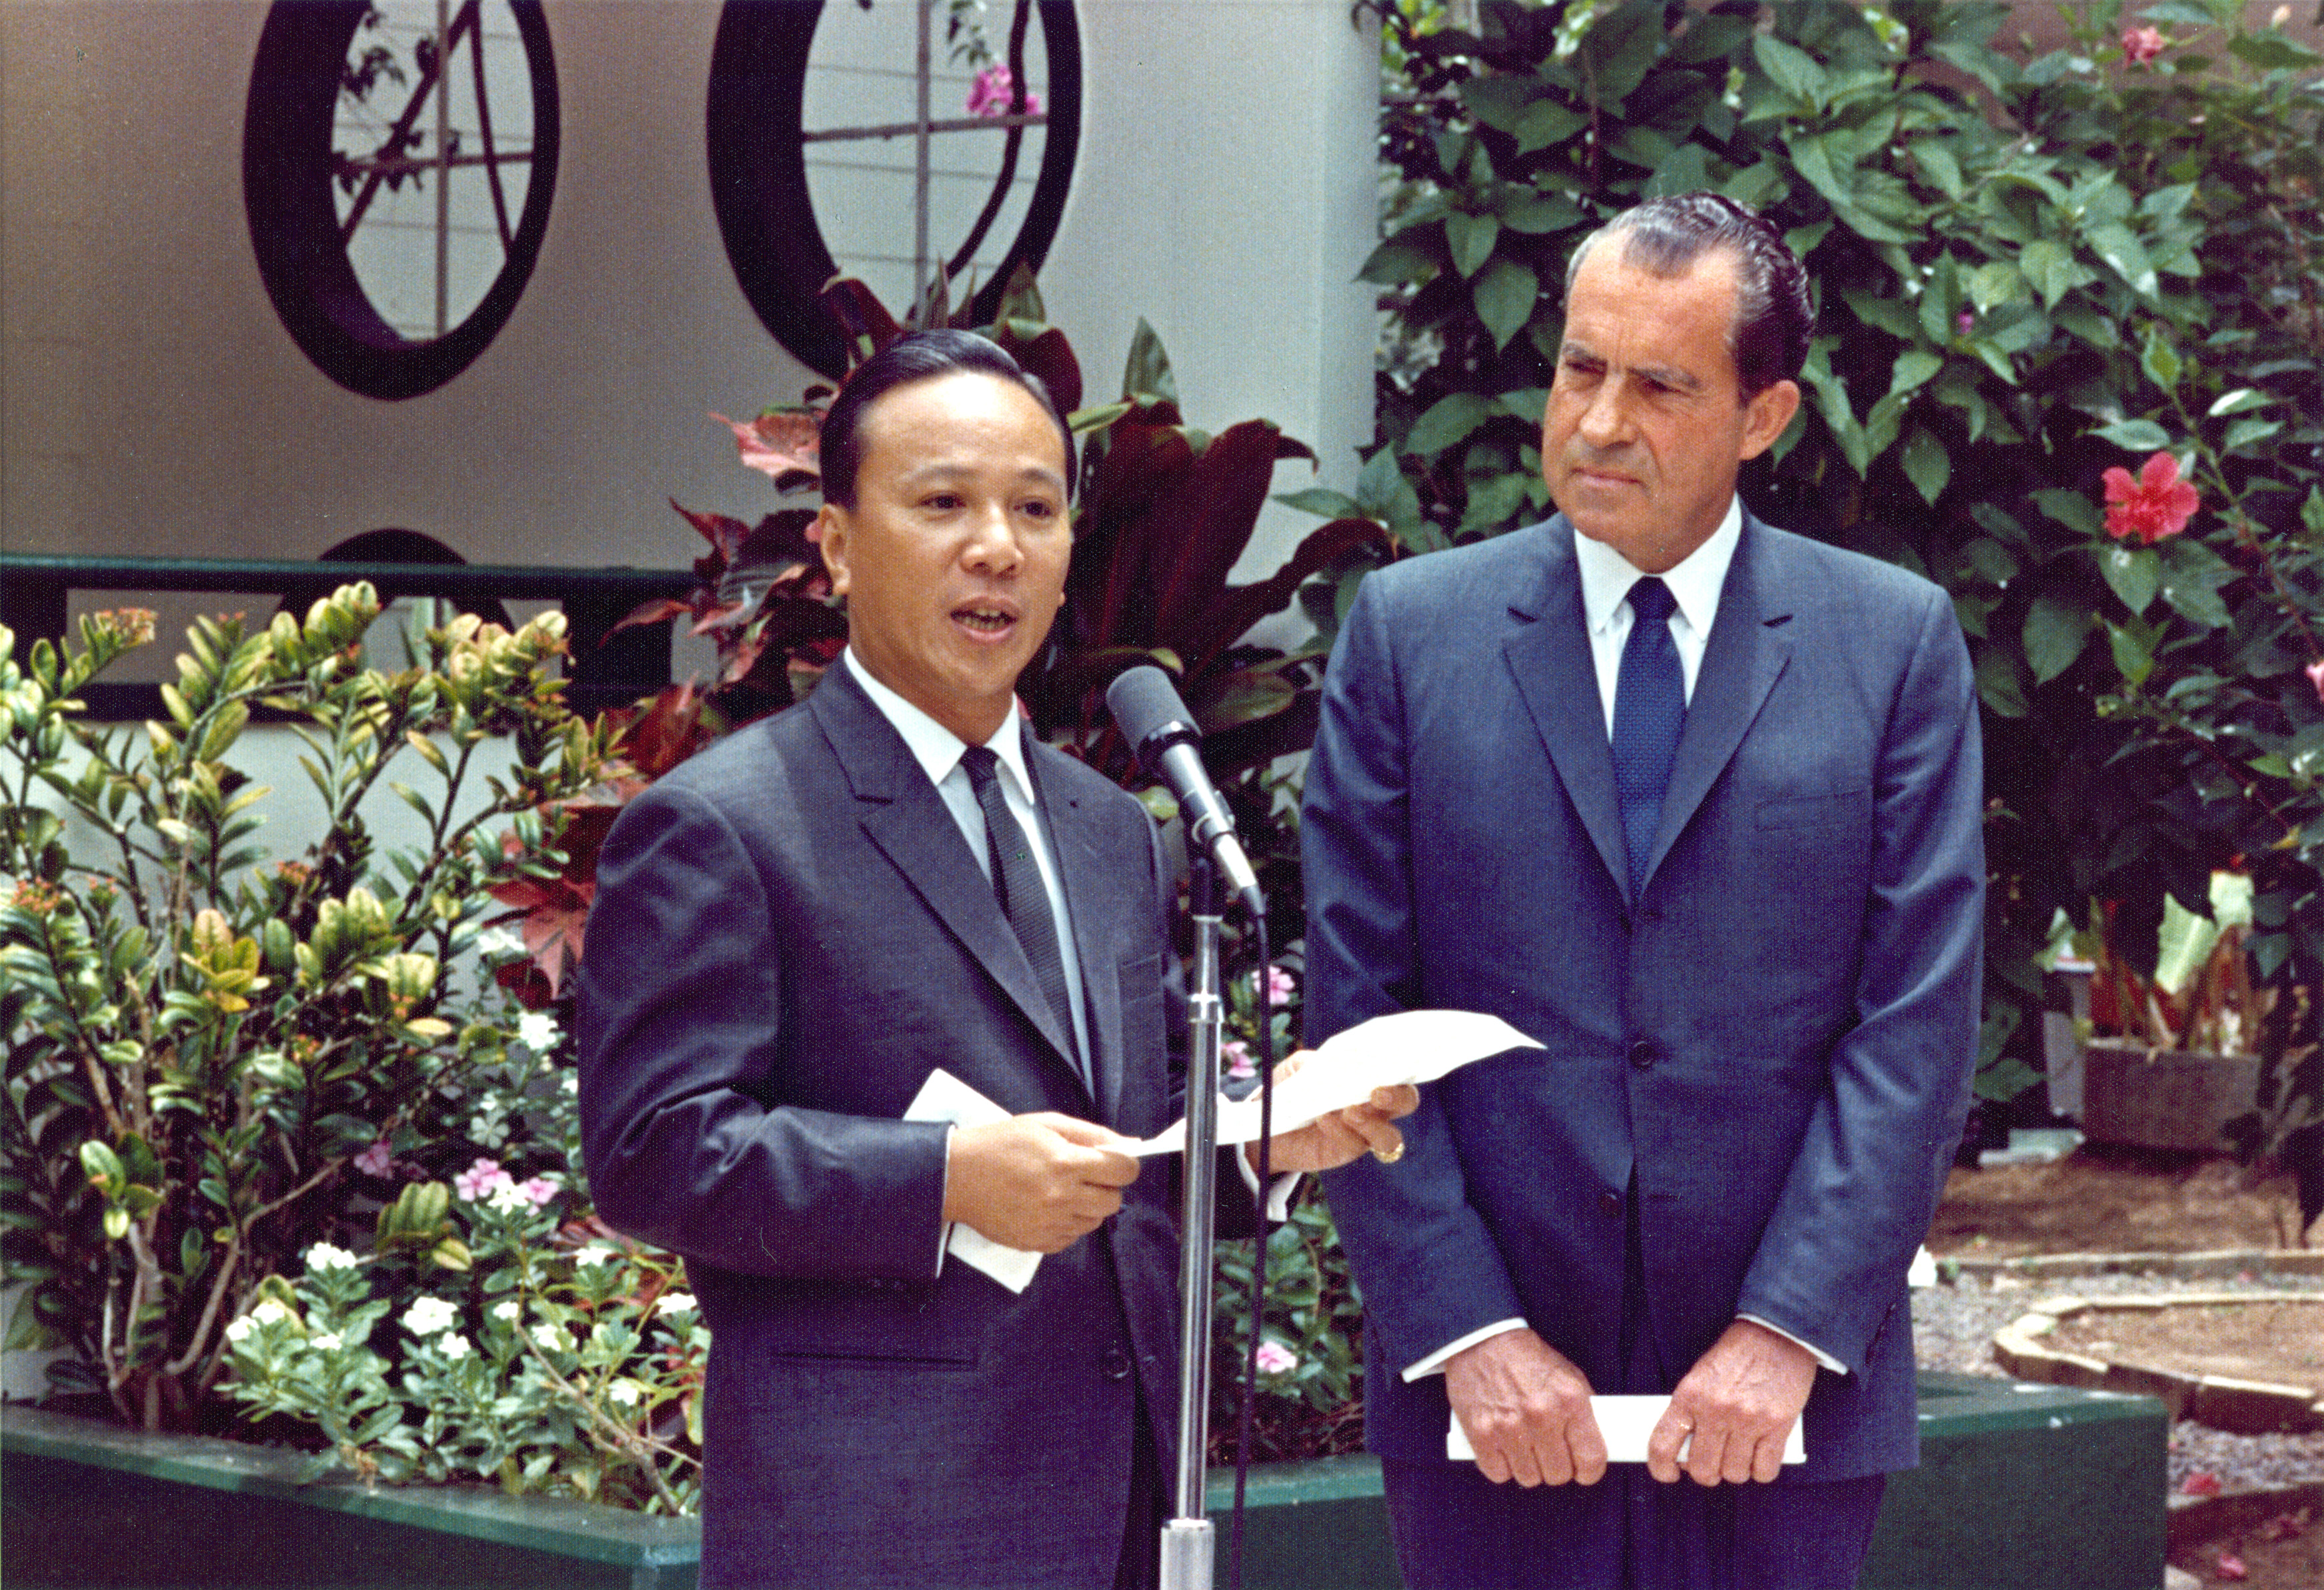 President Nixon and South Vietnamese dictator Nguyễn Văn Thiệu are dressed in suits and standing in front of a microphone stand to make a joint statement at Midway Island. Details in text.